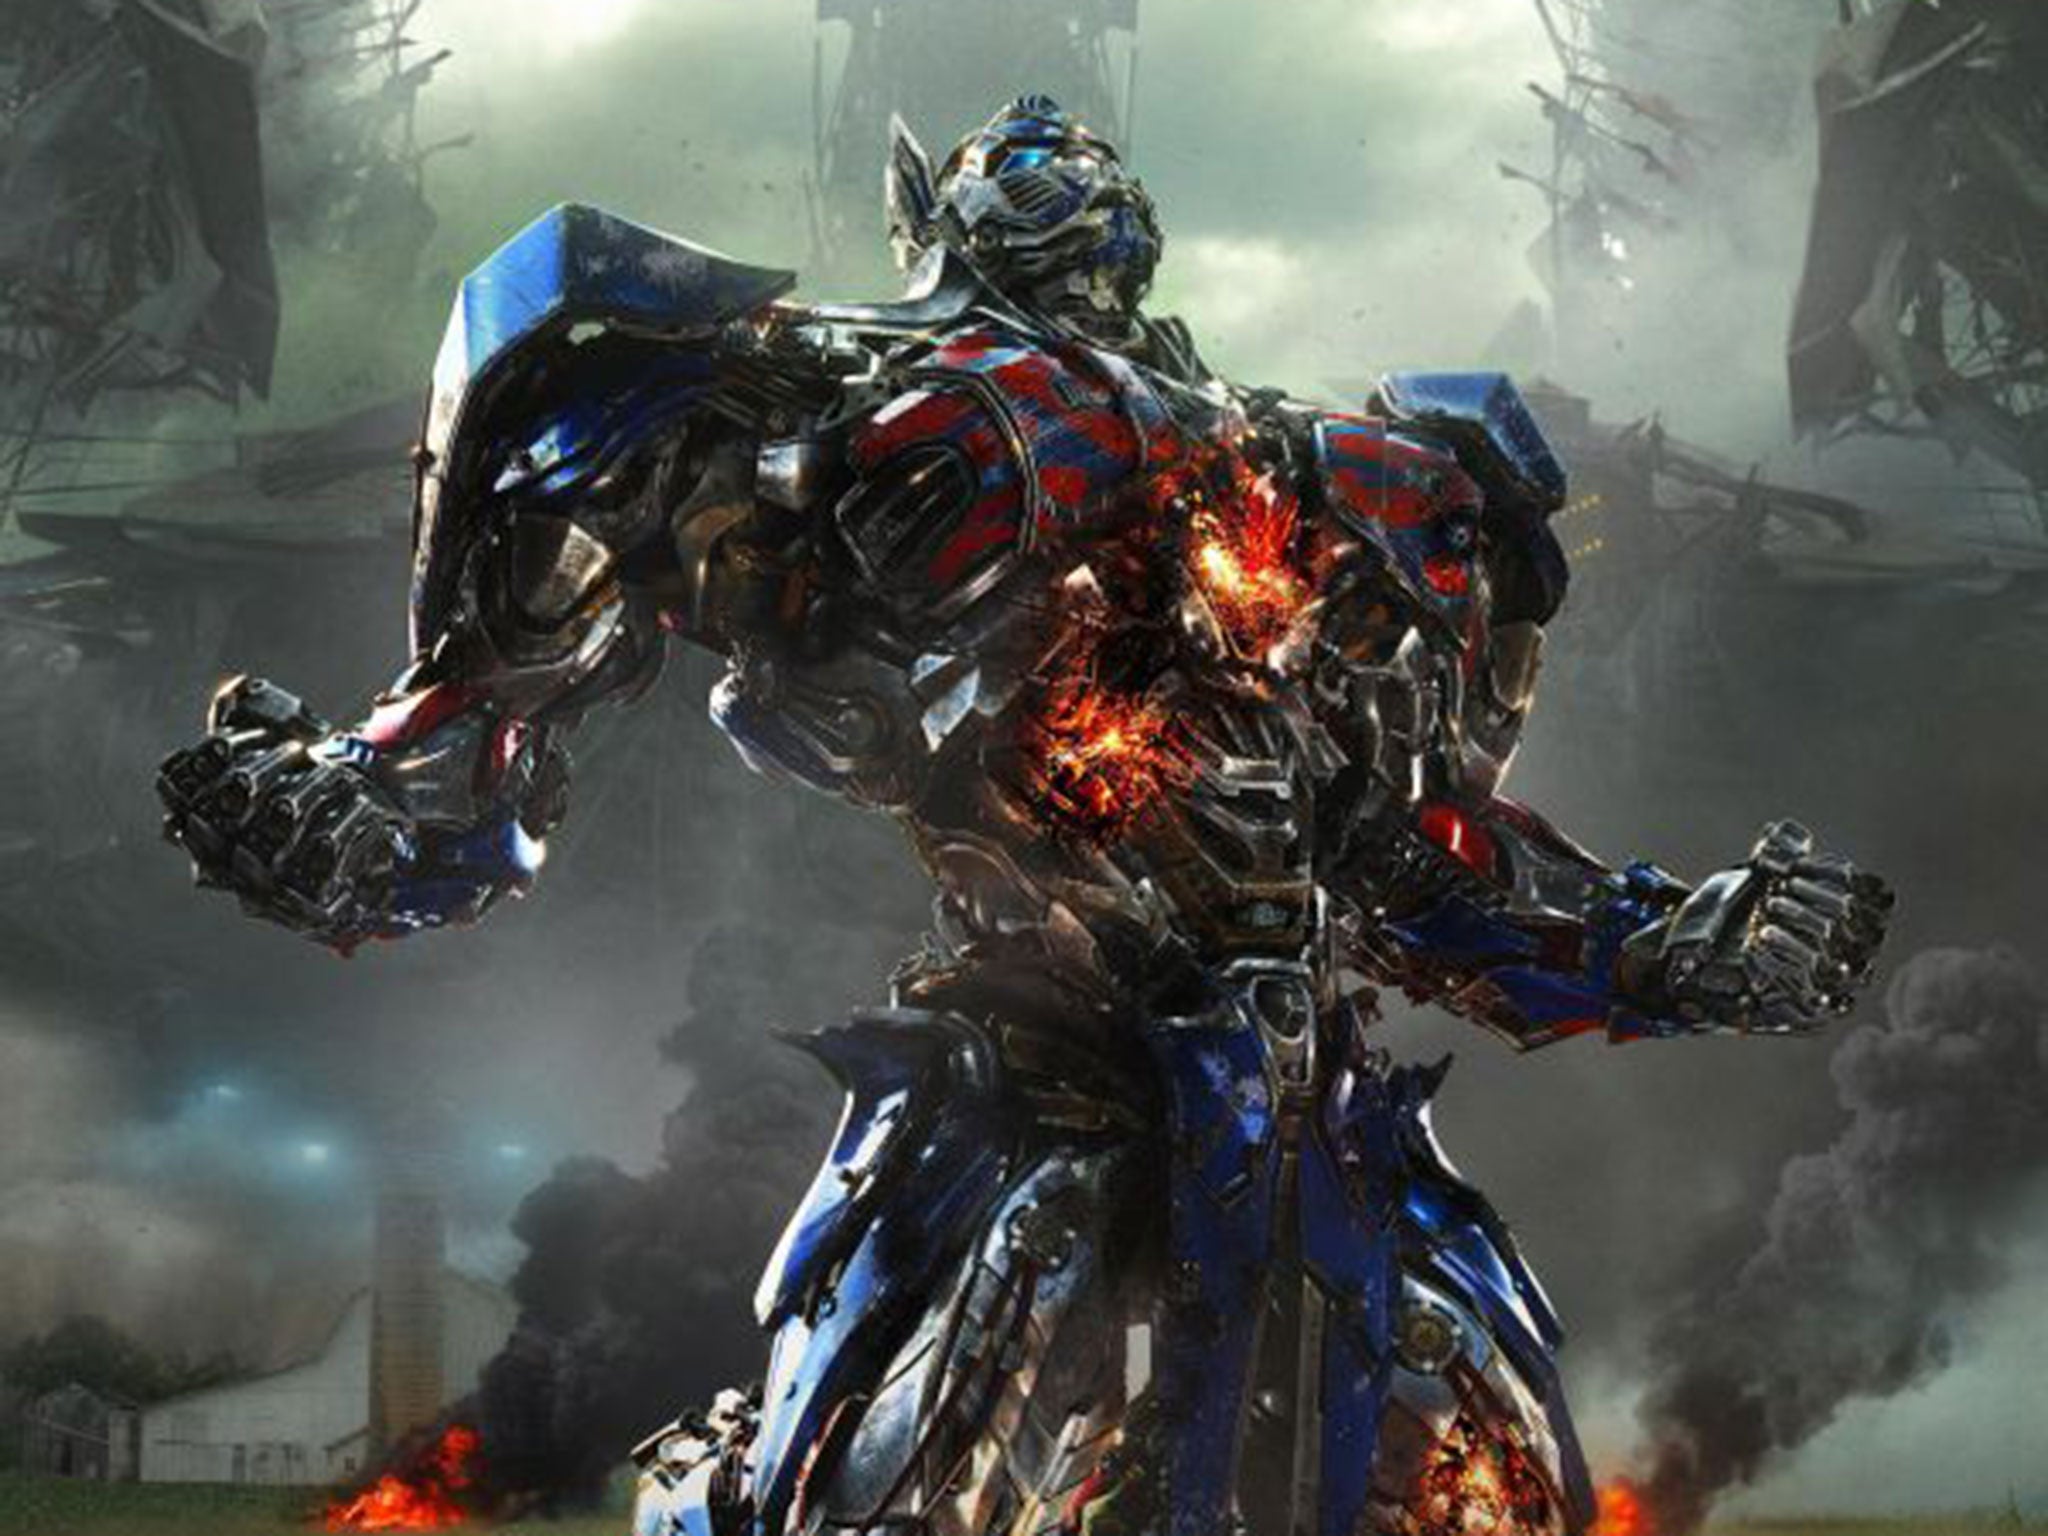 Transformers: Age of Extinction has picked up seven Golden Raspberry Awards nominations